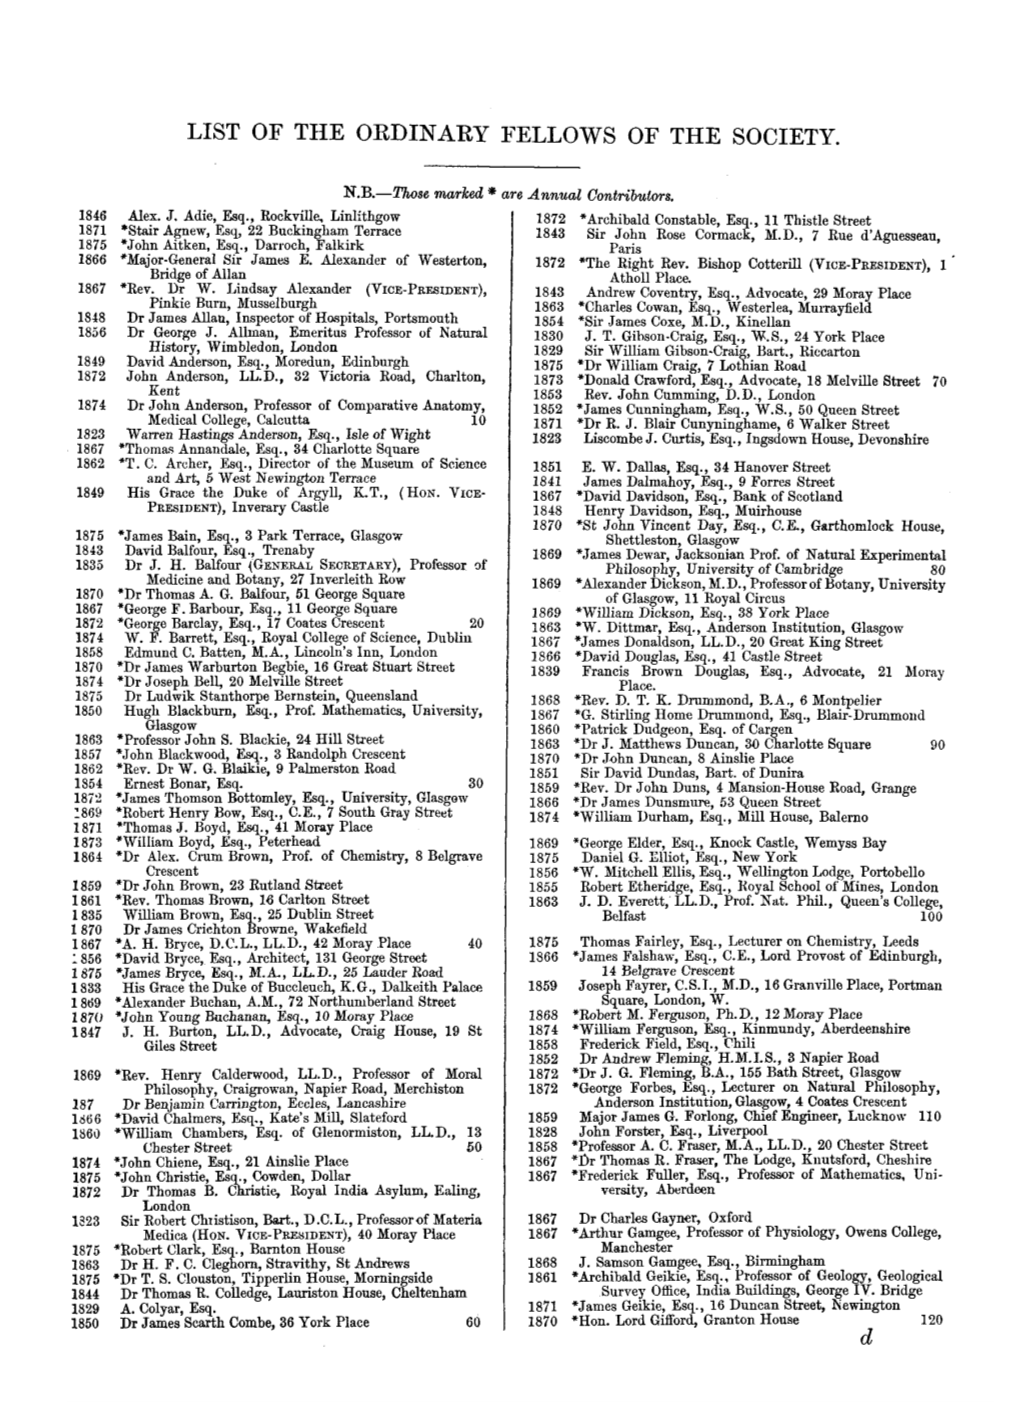 List of the Oedinary Fellows of the Society